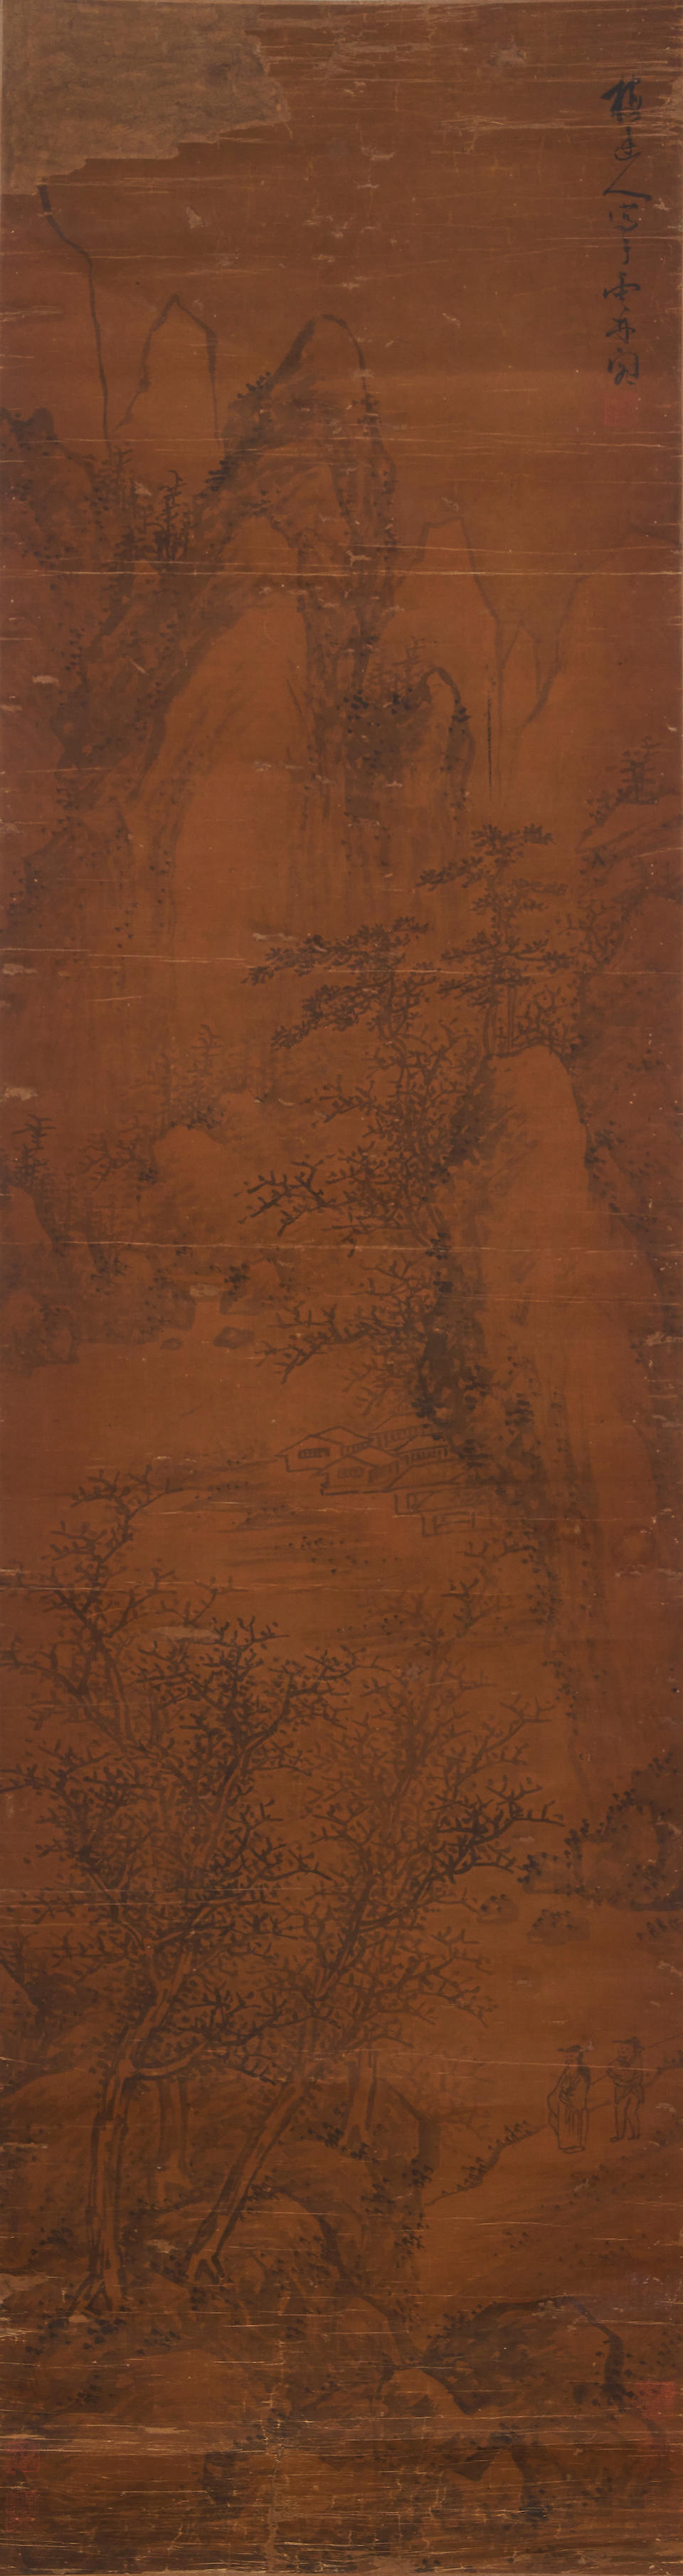 After to Wu Zhen (1280-1354) Landscape (4) - Image 2 of 5